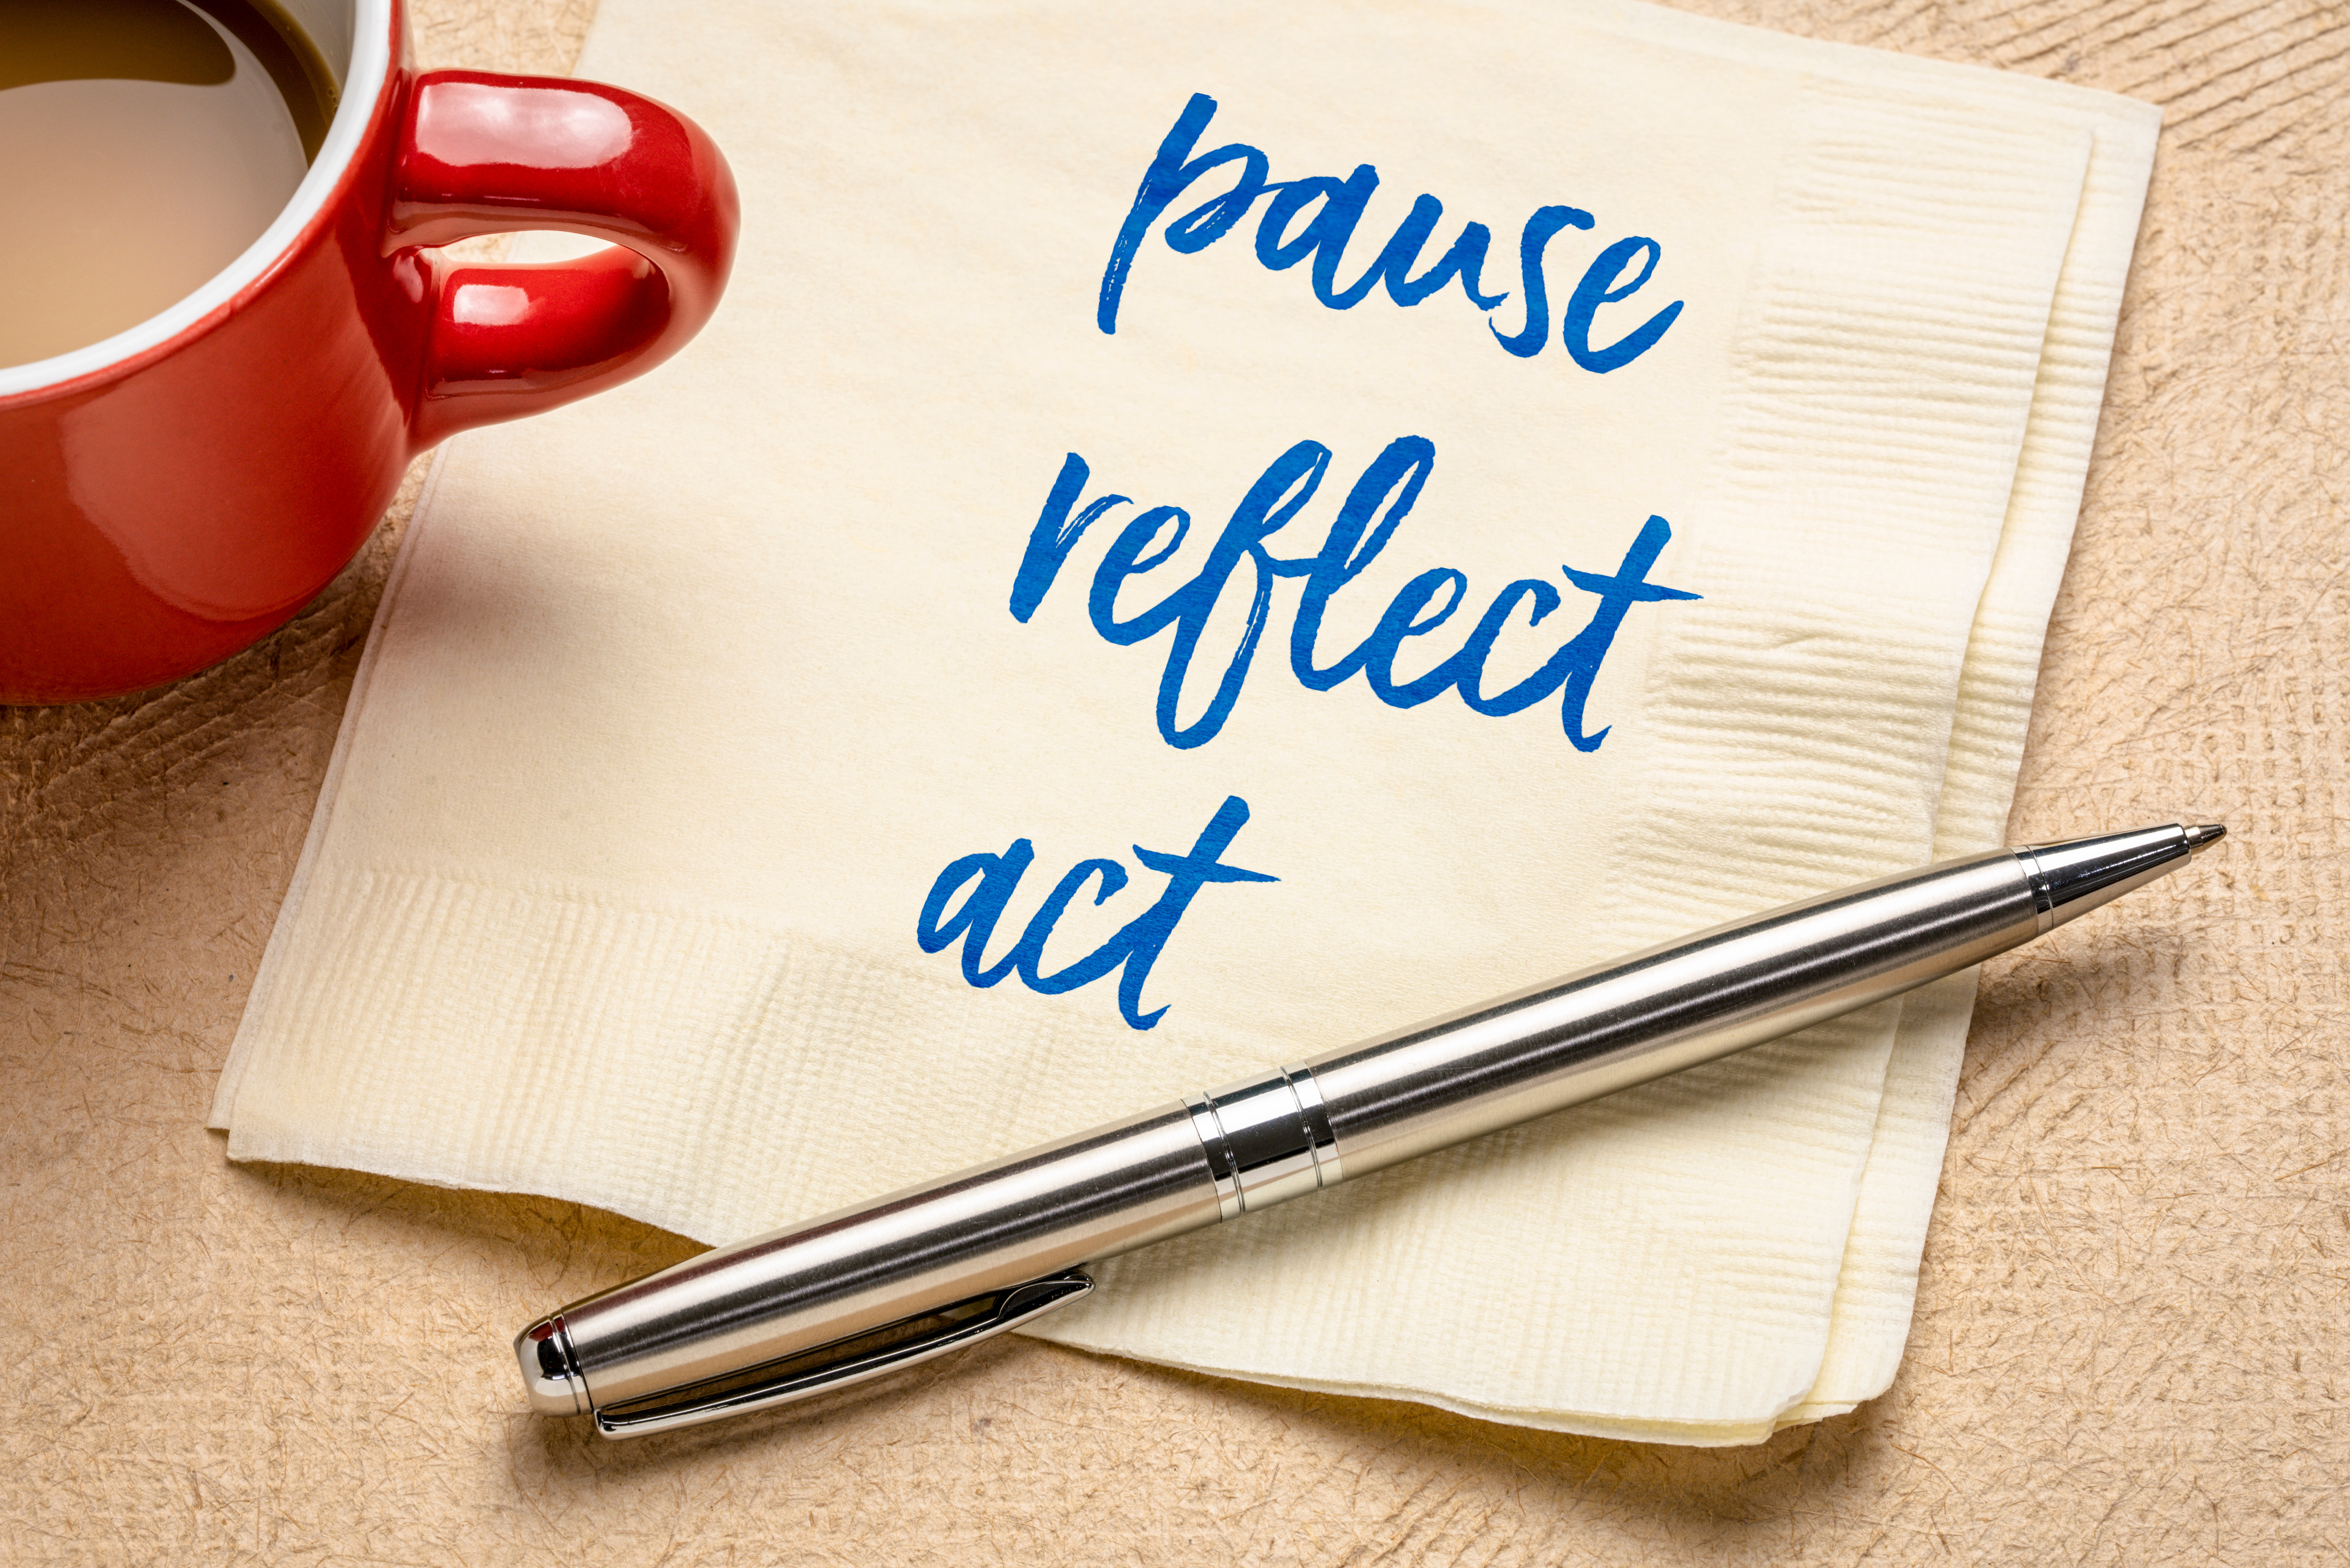 Coffee cup and a pen on a napkin with pause, reflect, act written on the napkin